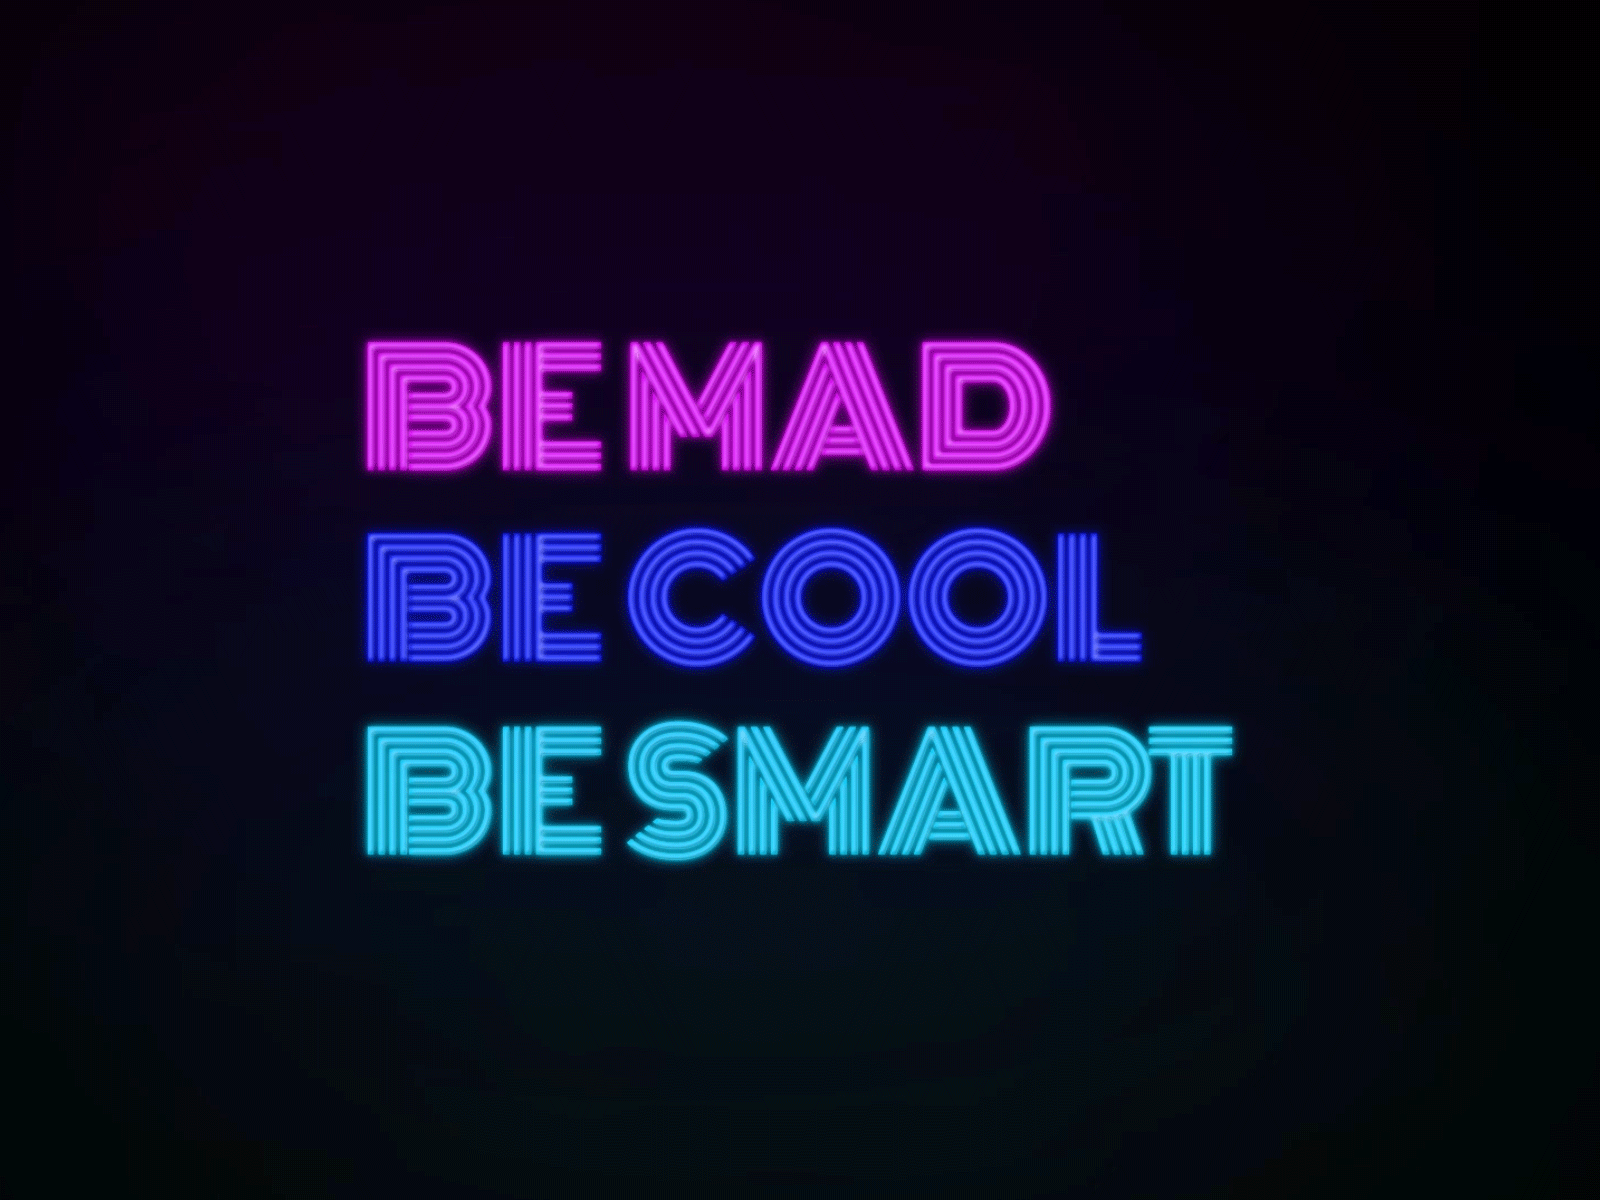 Be mad, be cool, be smart